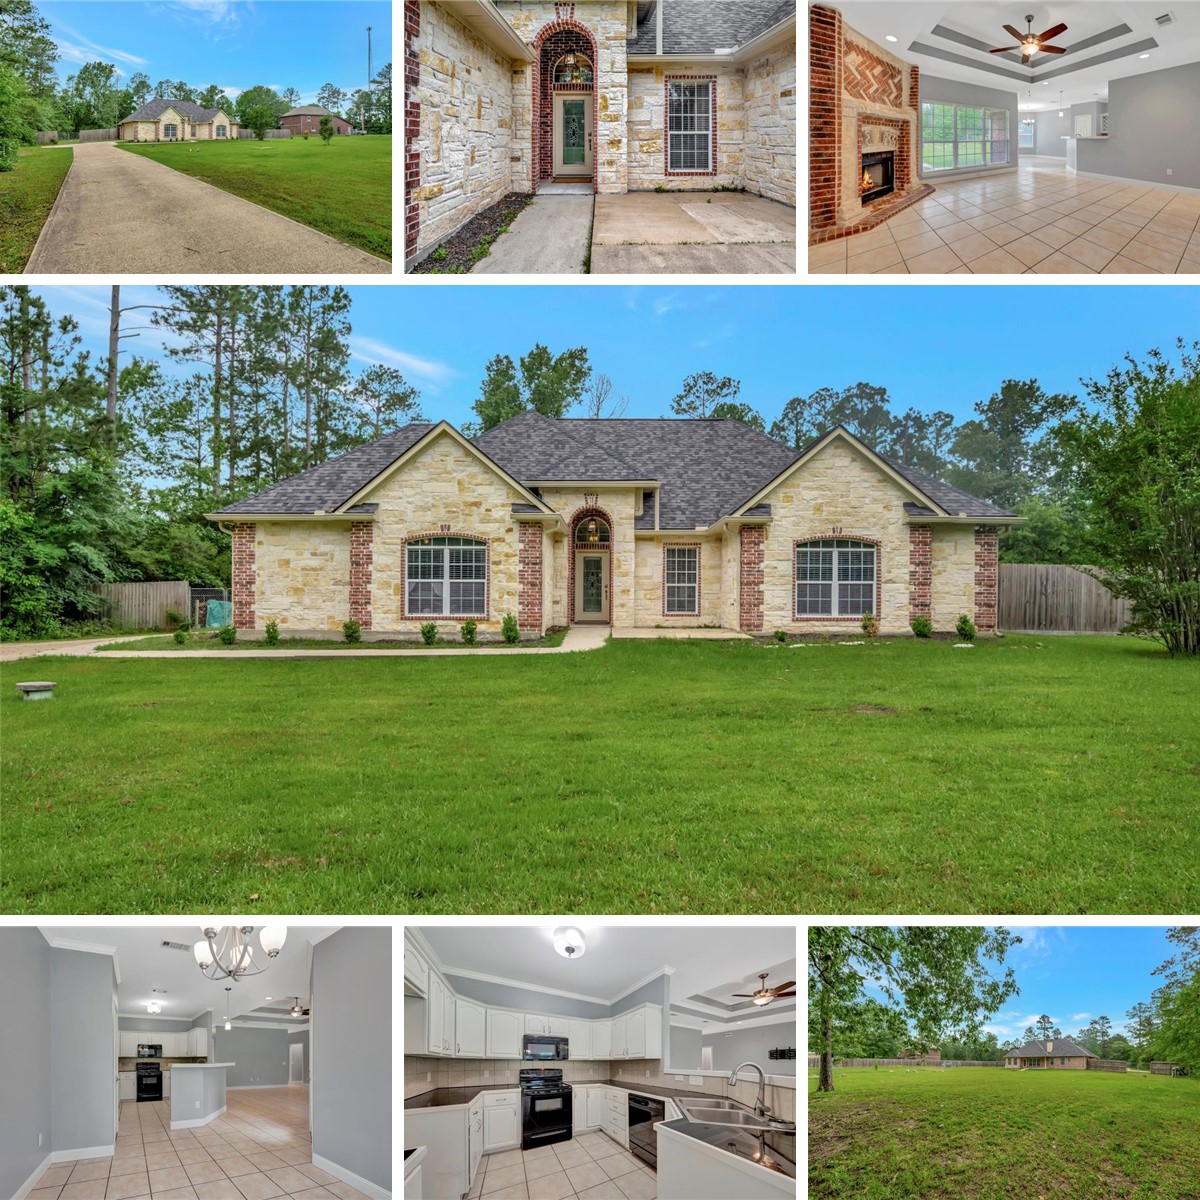 4 bdr/ 3 bth STUNNING traditional style home  situated on 2 acres.  Located on slightly outside of Lufkin city limits.
Presented by Mia Wright, Realtor of Grand Luxe Realty Co.
tinyurl.com/2nwvd7og
#lufkinrealestate #realestatephotography by 360 Media of East Texas